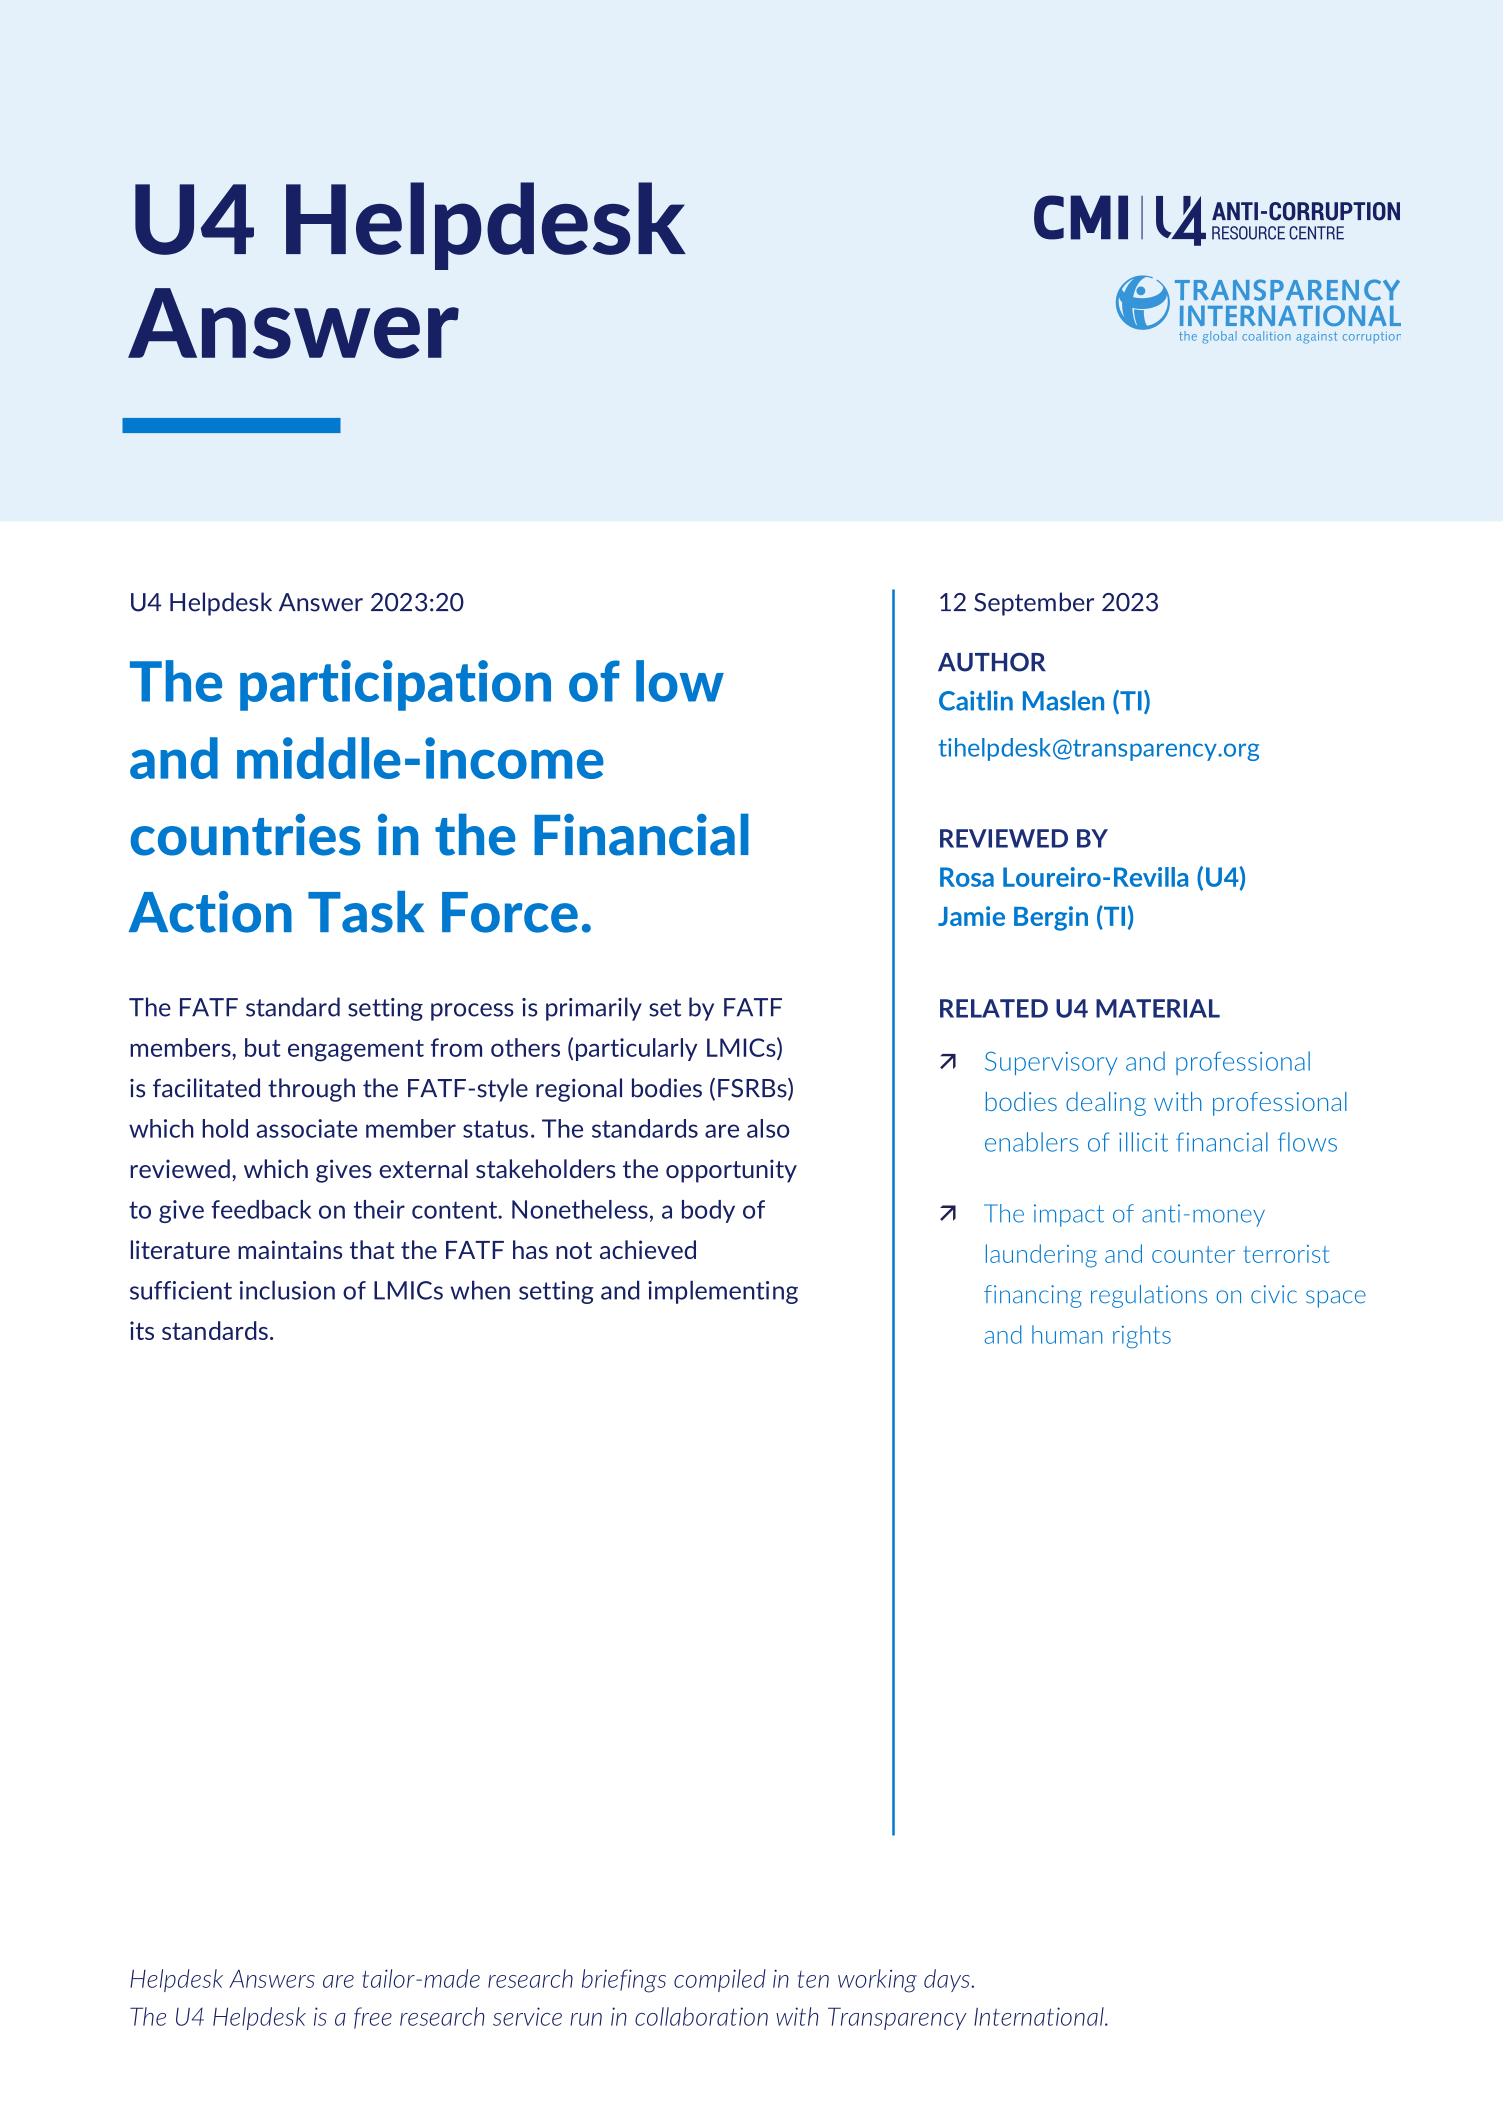 The participation of low and middle-income countries in the Financial Action Task Force